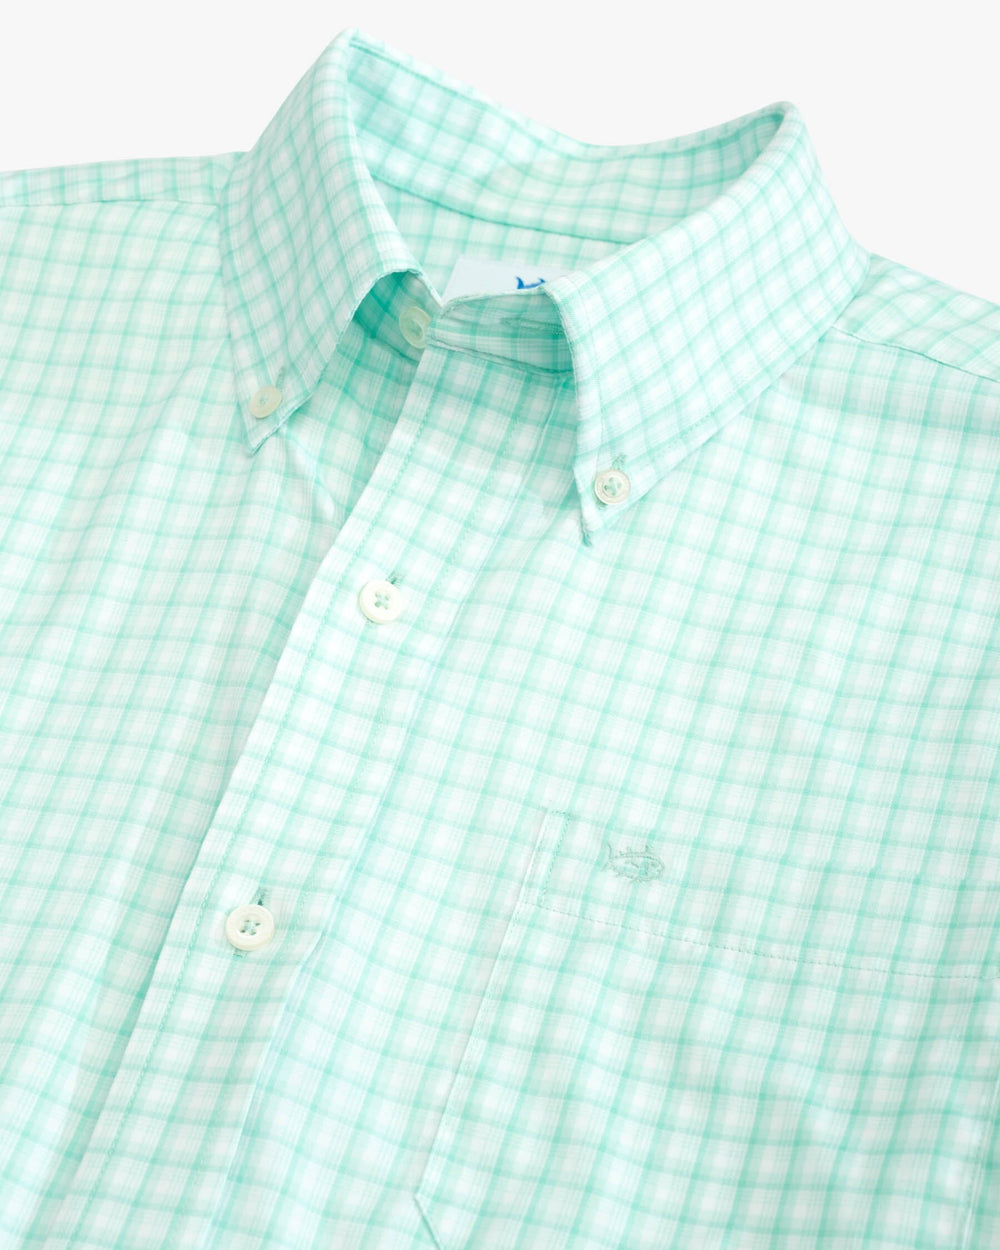 The detail view of the Southern Tide brrr Skycrest Plaid Intercoastal Sport Shirt by Southern Tide - Baltic Teal